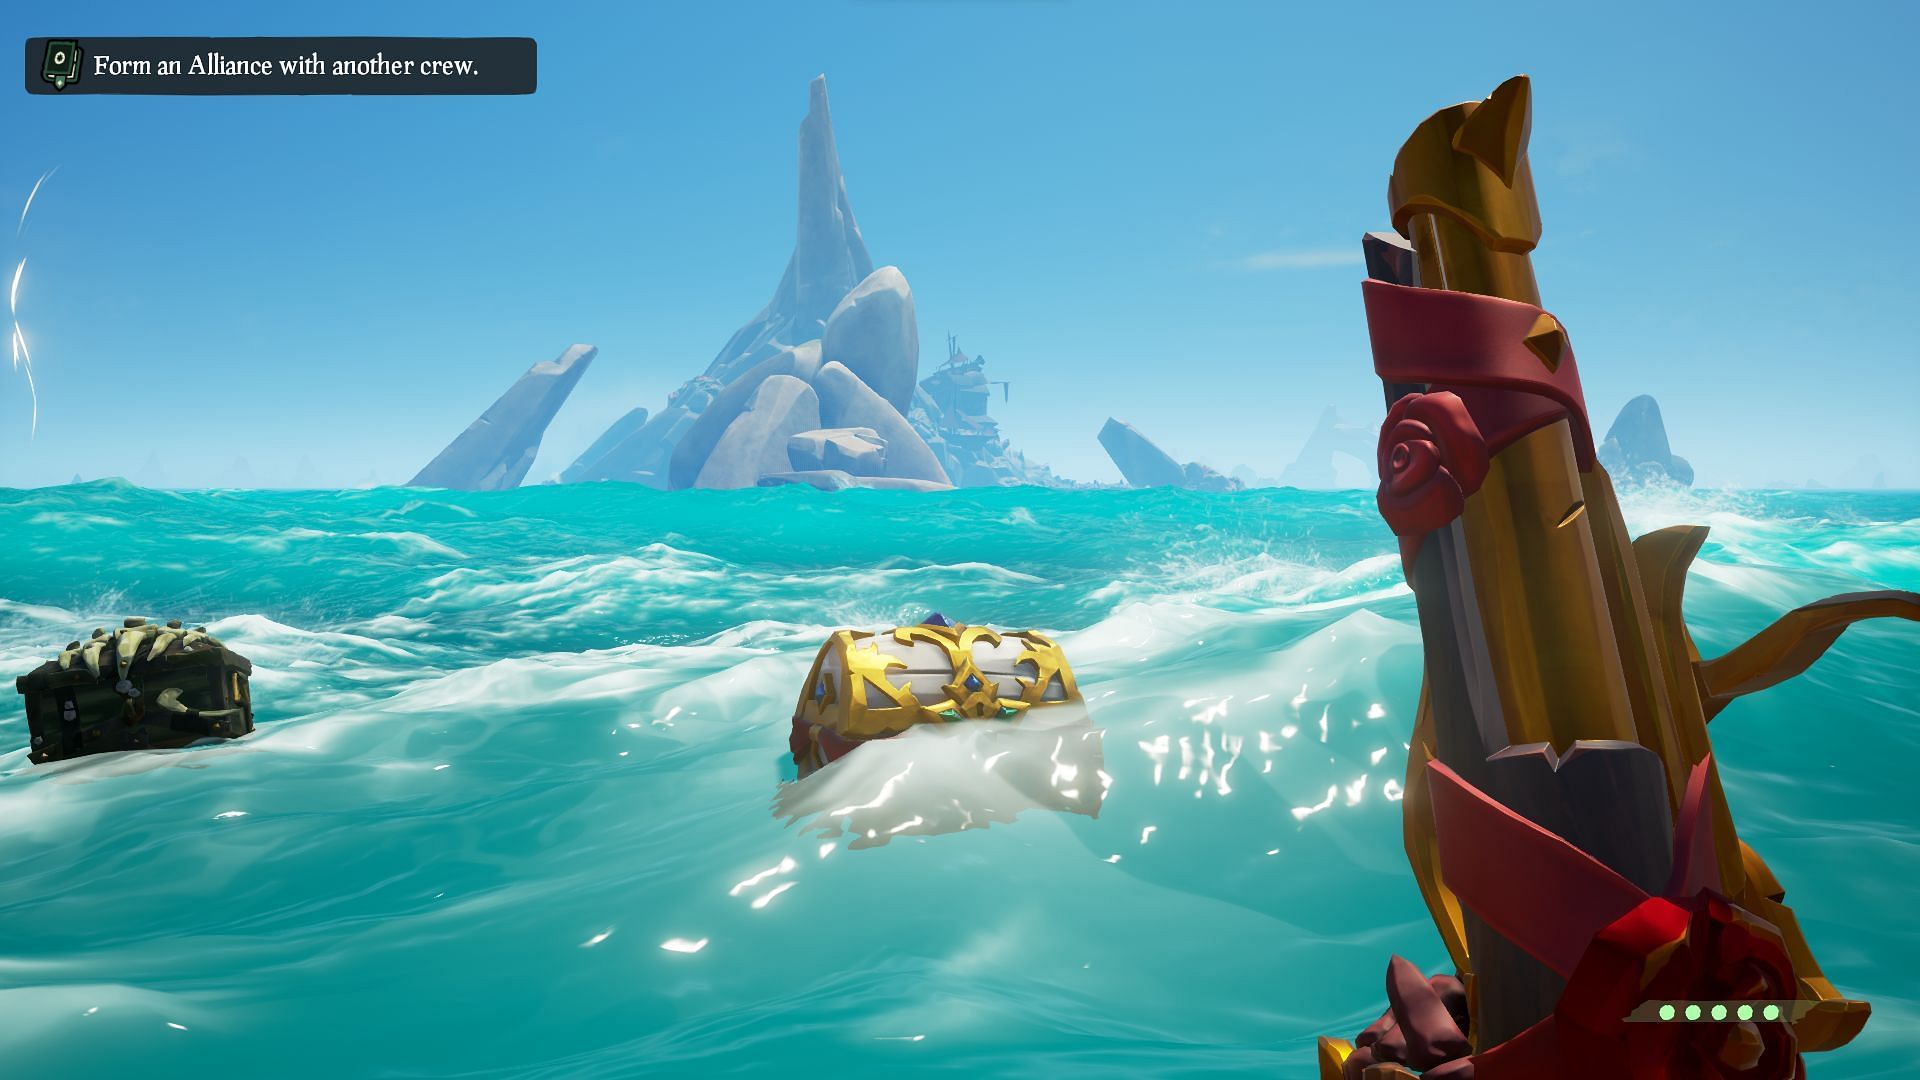 Chest of Fortune, as seen floating in the water after defeating the fleet. (Image via Rare)